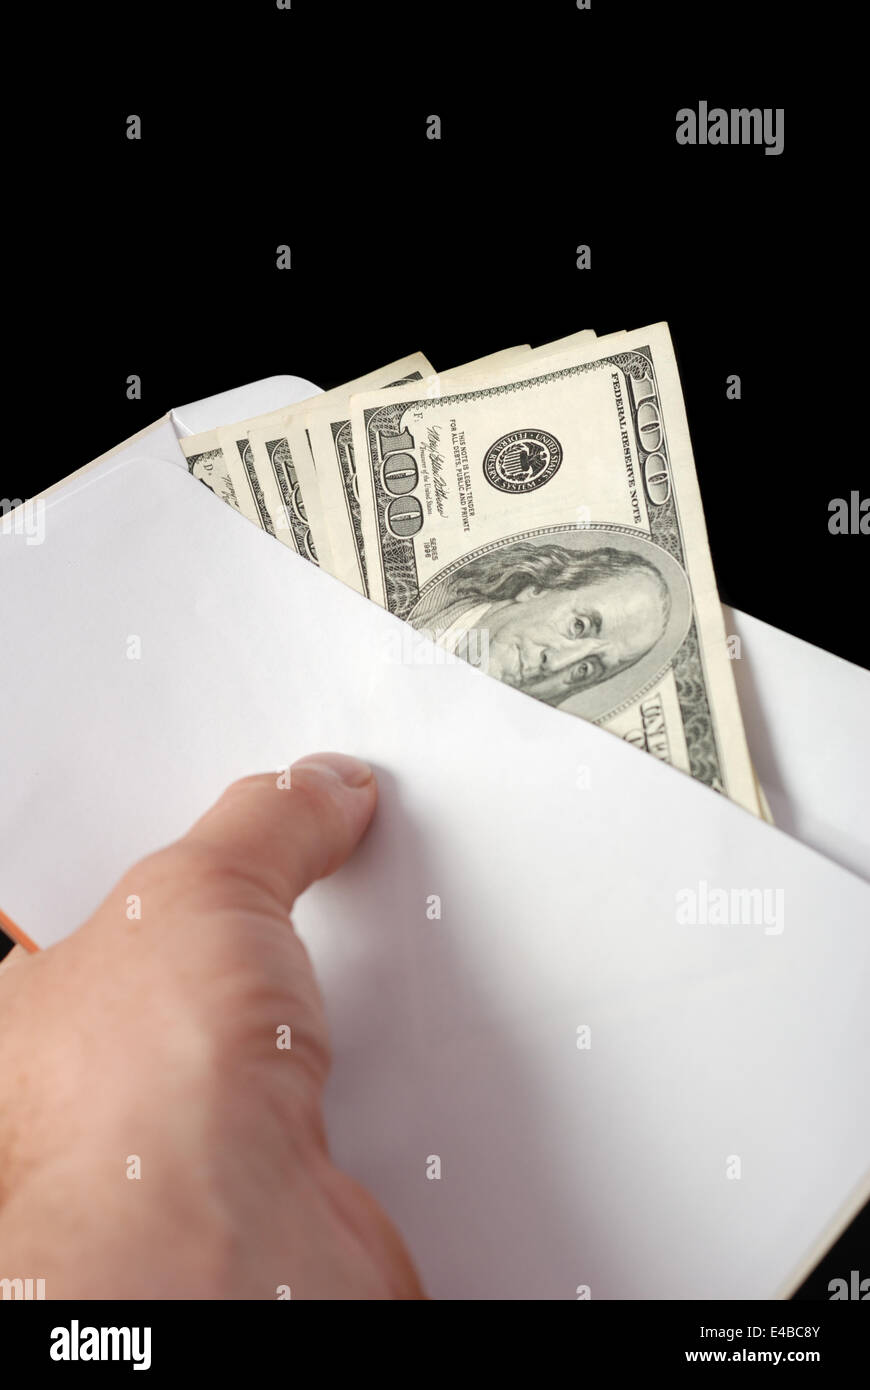 Bribe in an envelope and hand Stock Photo